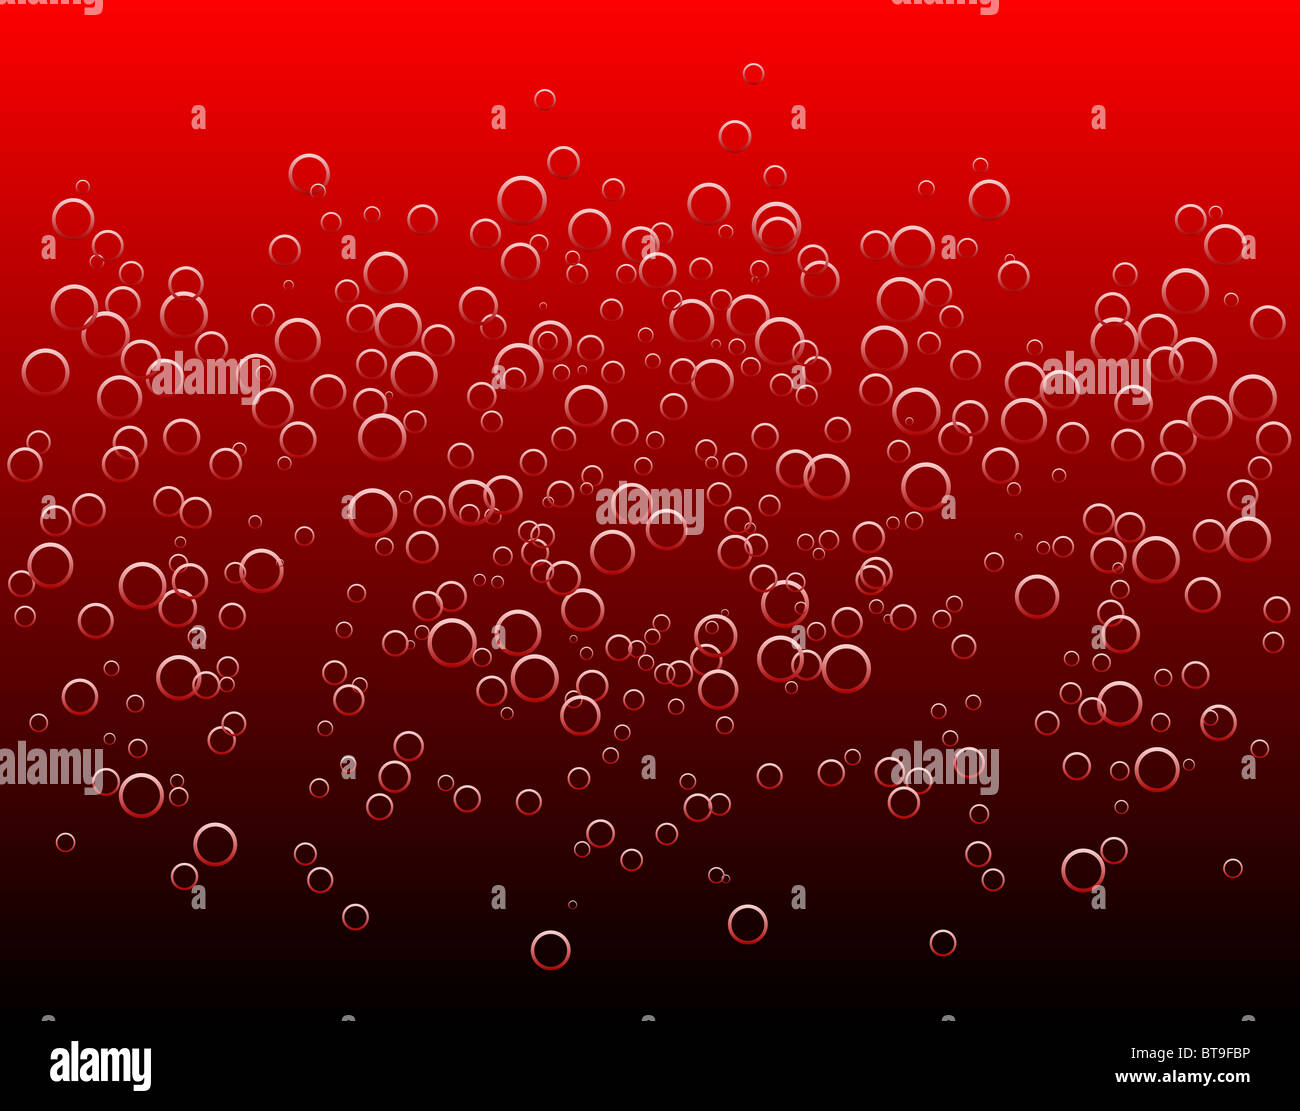 Abstract illustrated background of a bubbling liquid Stock Photo